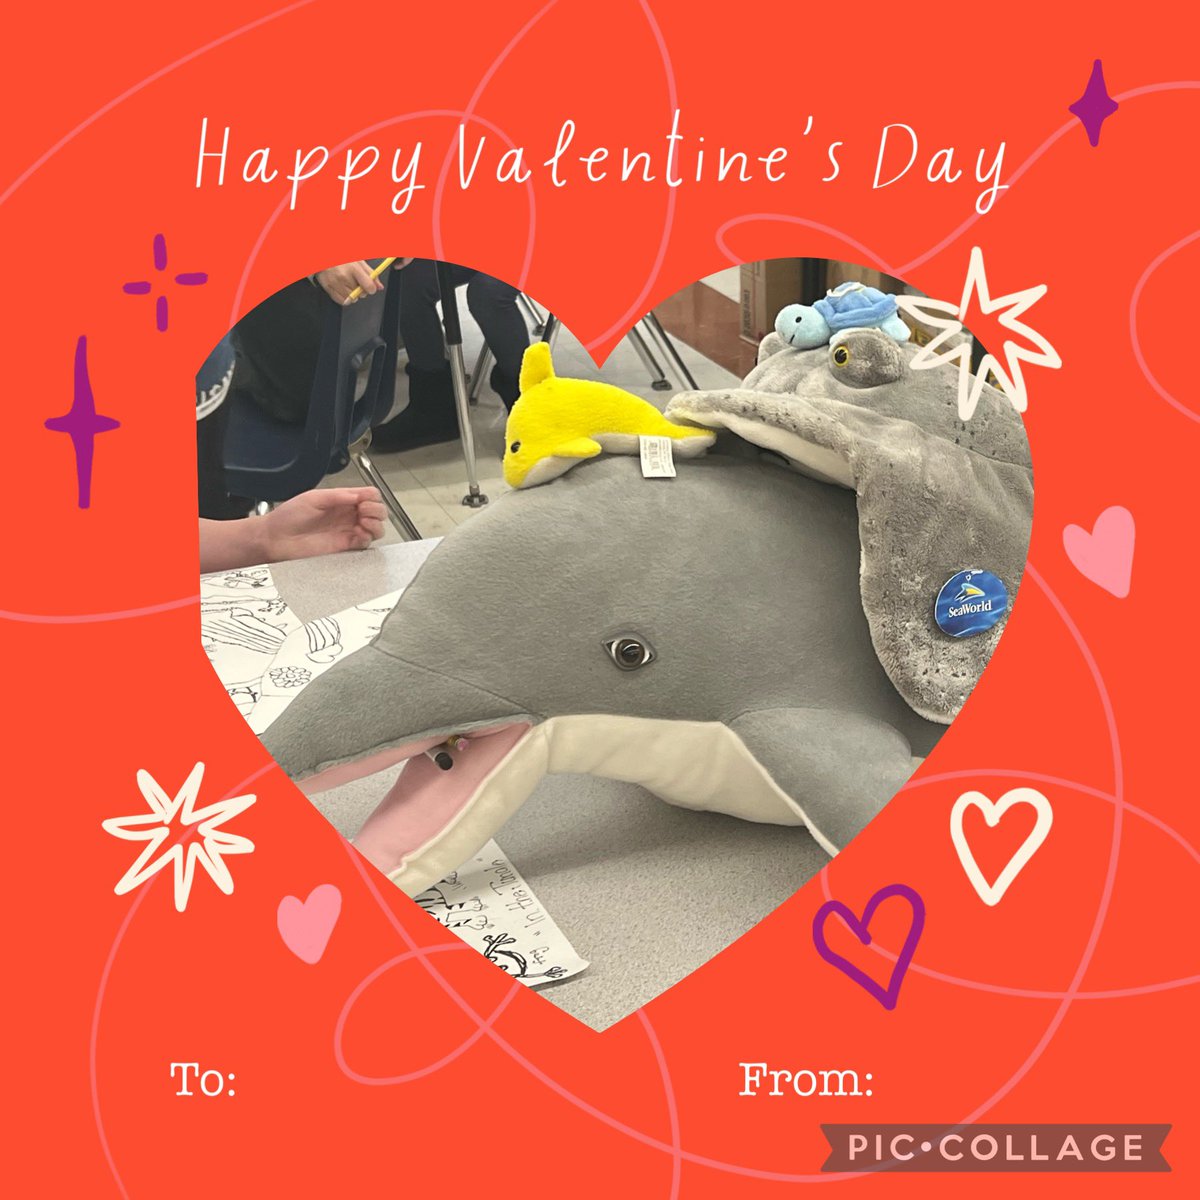 What a sweet way to celebrate Valentine’s Day❤️💕🥰 CMS Artists are always excited when their awesome classroom behavior earns them sea animal friends at their art tables!😊🎨👏🐬 @CMSmtolive @NicoleMusarra @ashleylopez210